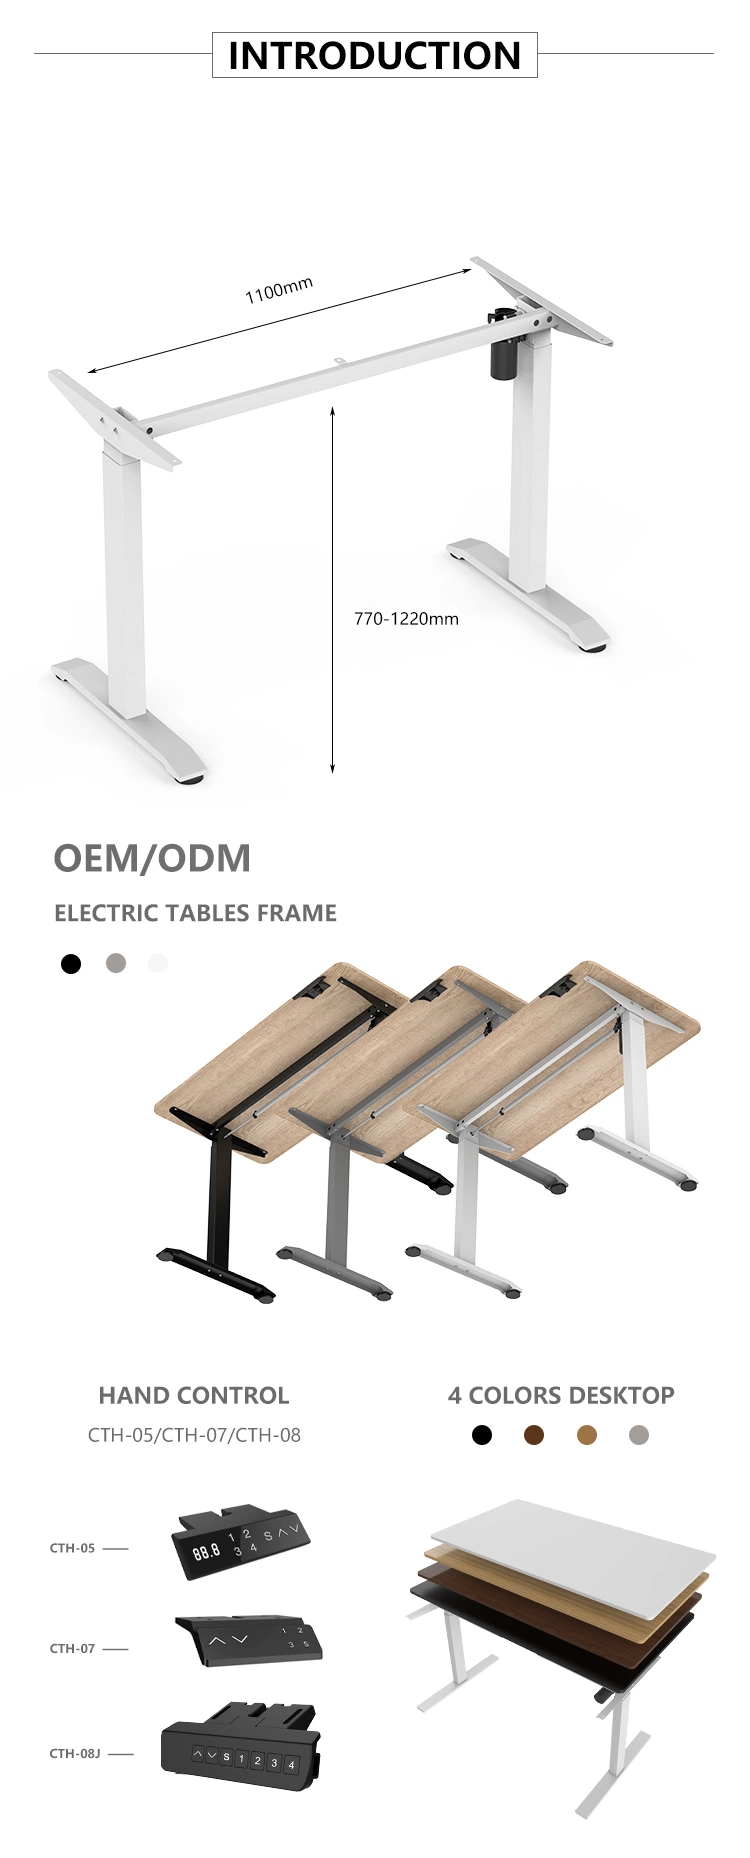 OEM/ODM Modern Office Electric Desk Rising Height Adjustable Sit Stand up Standing Desk for Office Home Furniture